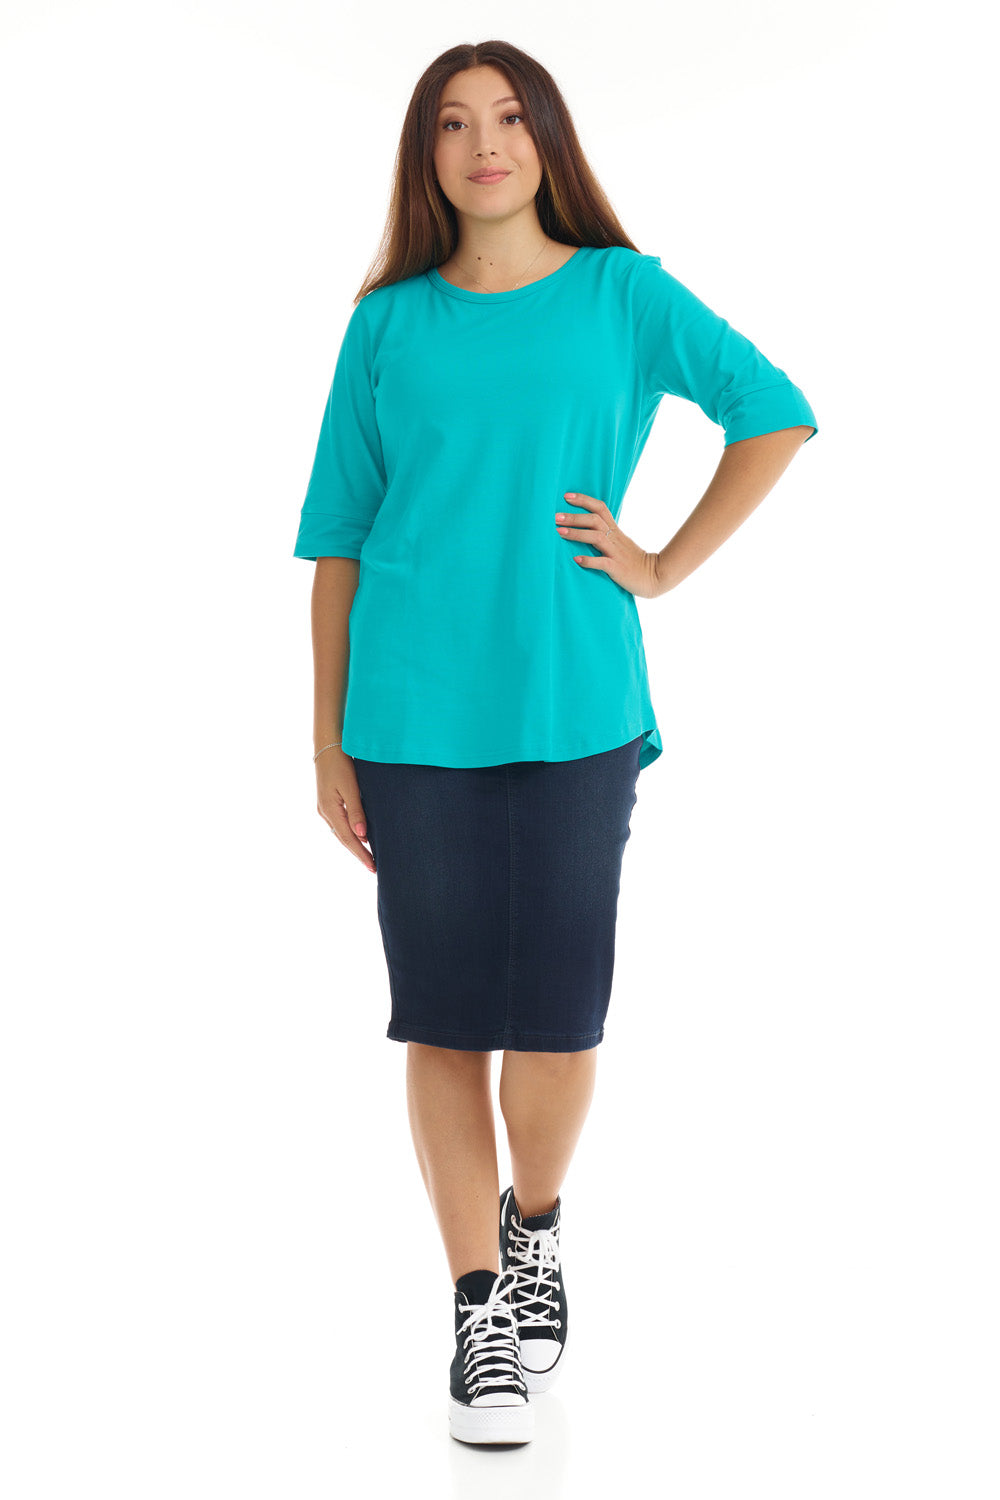 teal crew neck top for women with cuff sleeve